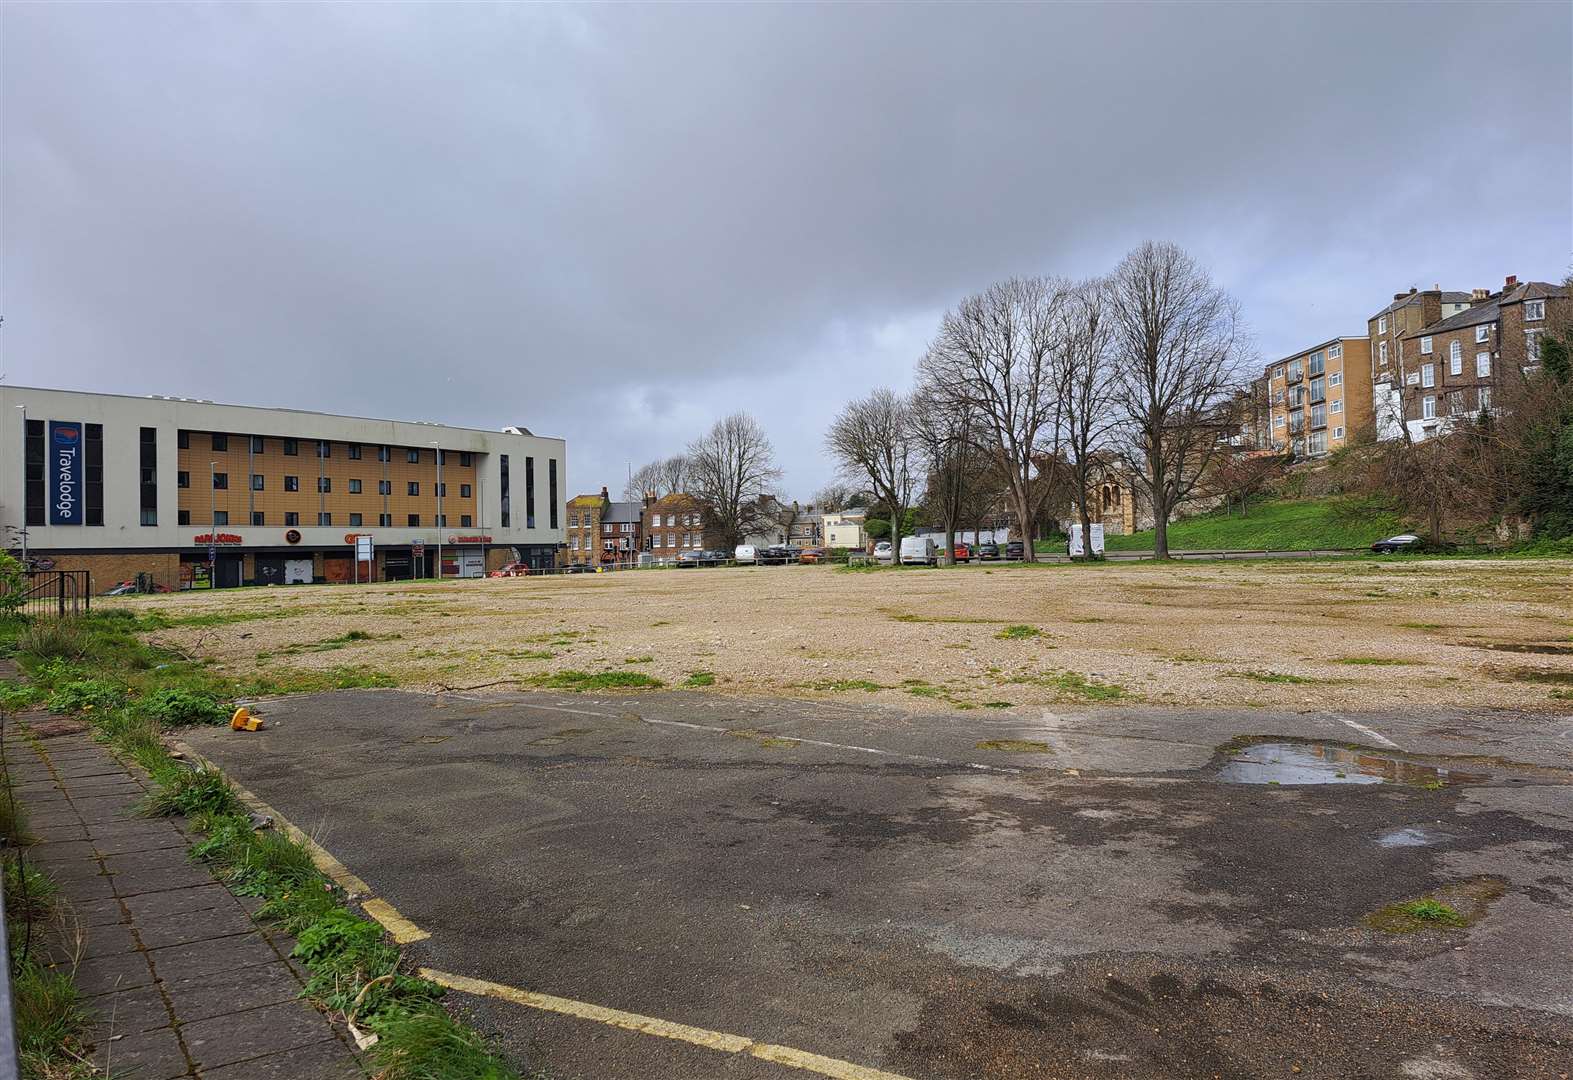 The proposed McDonald’s drive-thru on the former Dover Leisure Centre site has been met with huge backlash